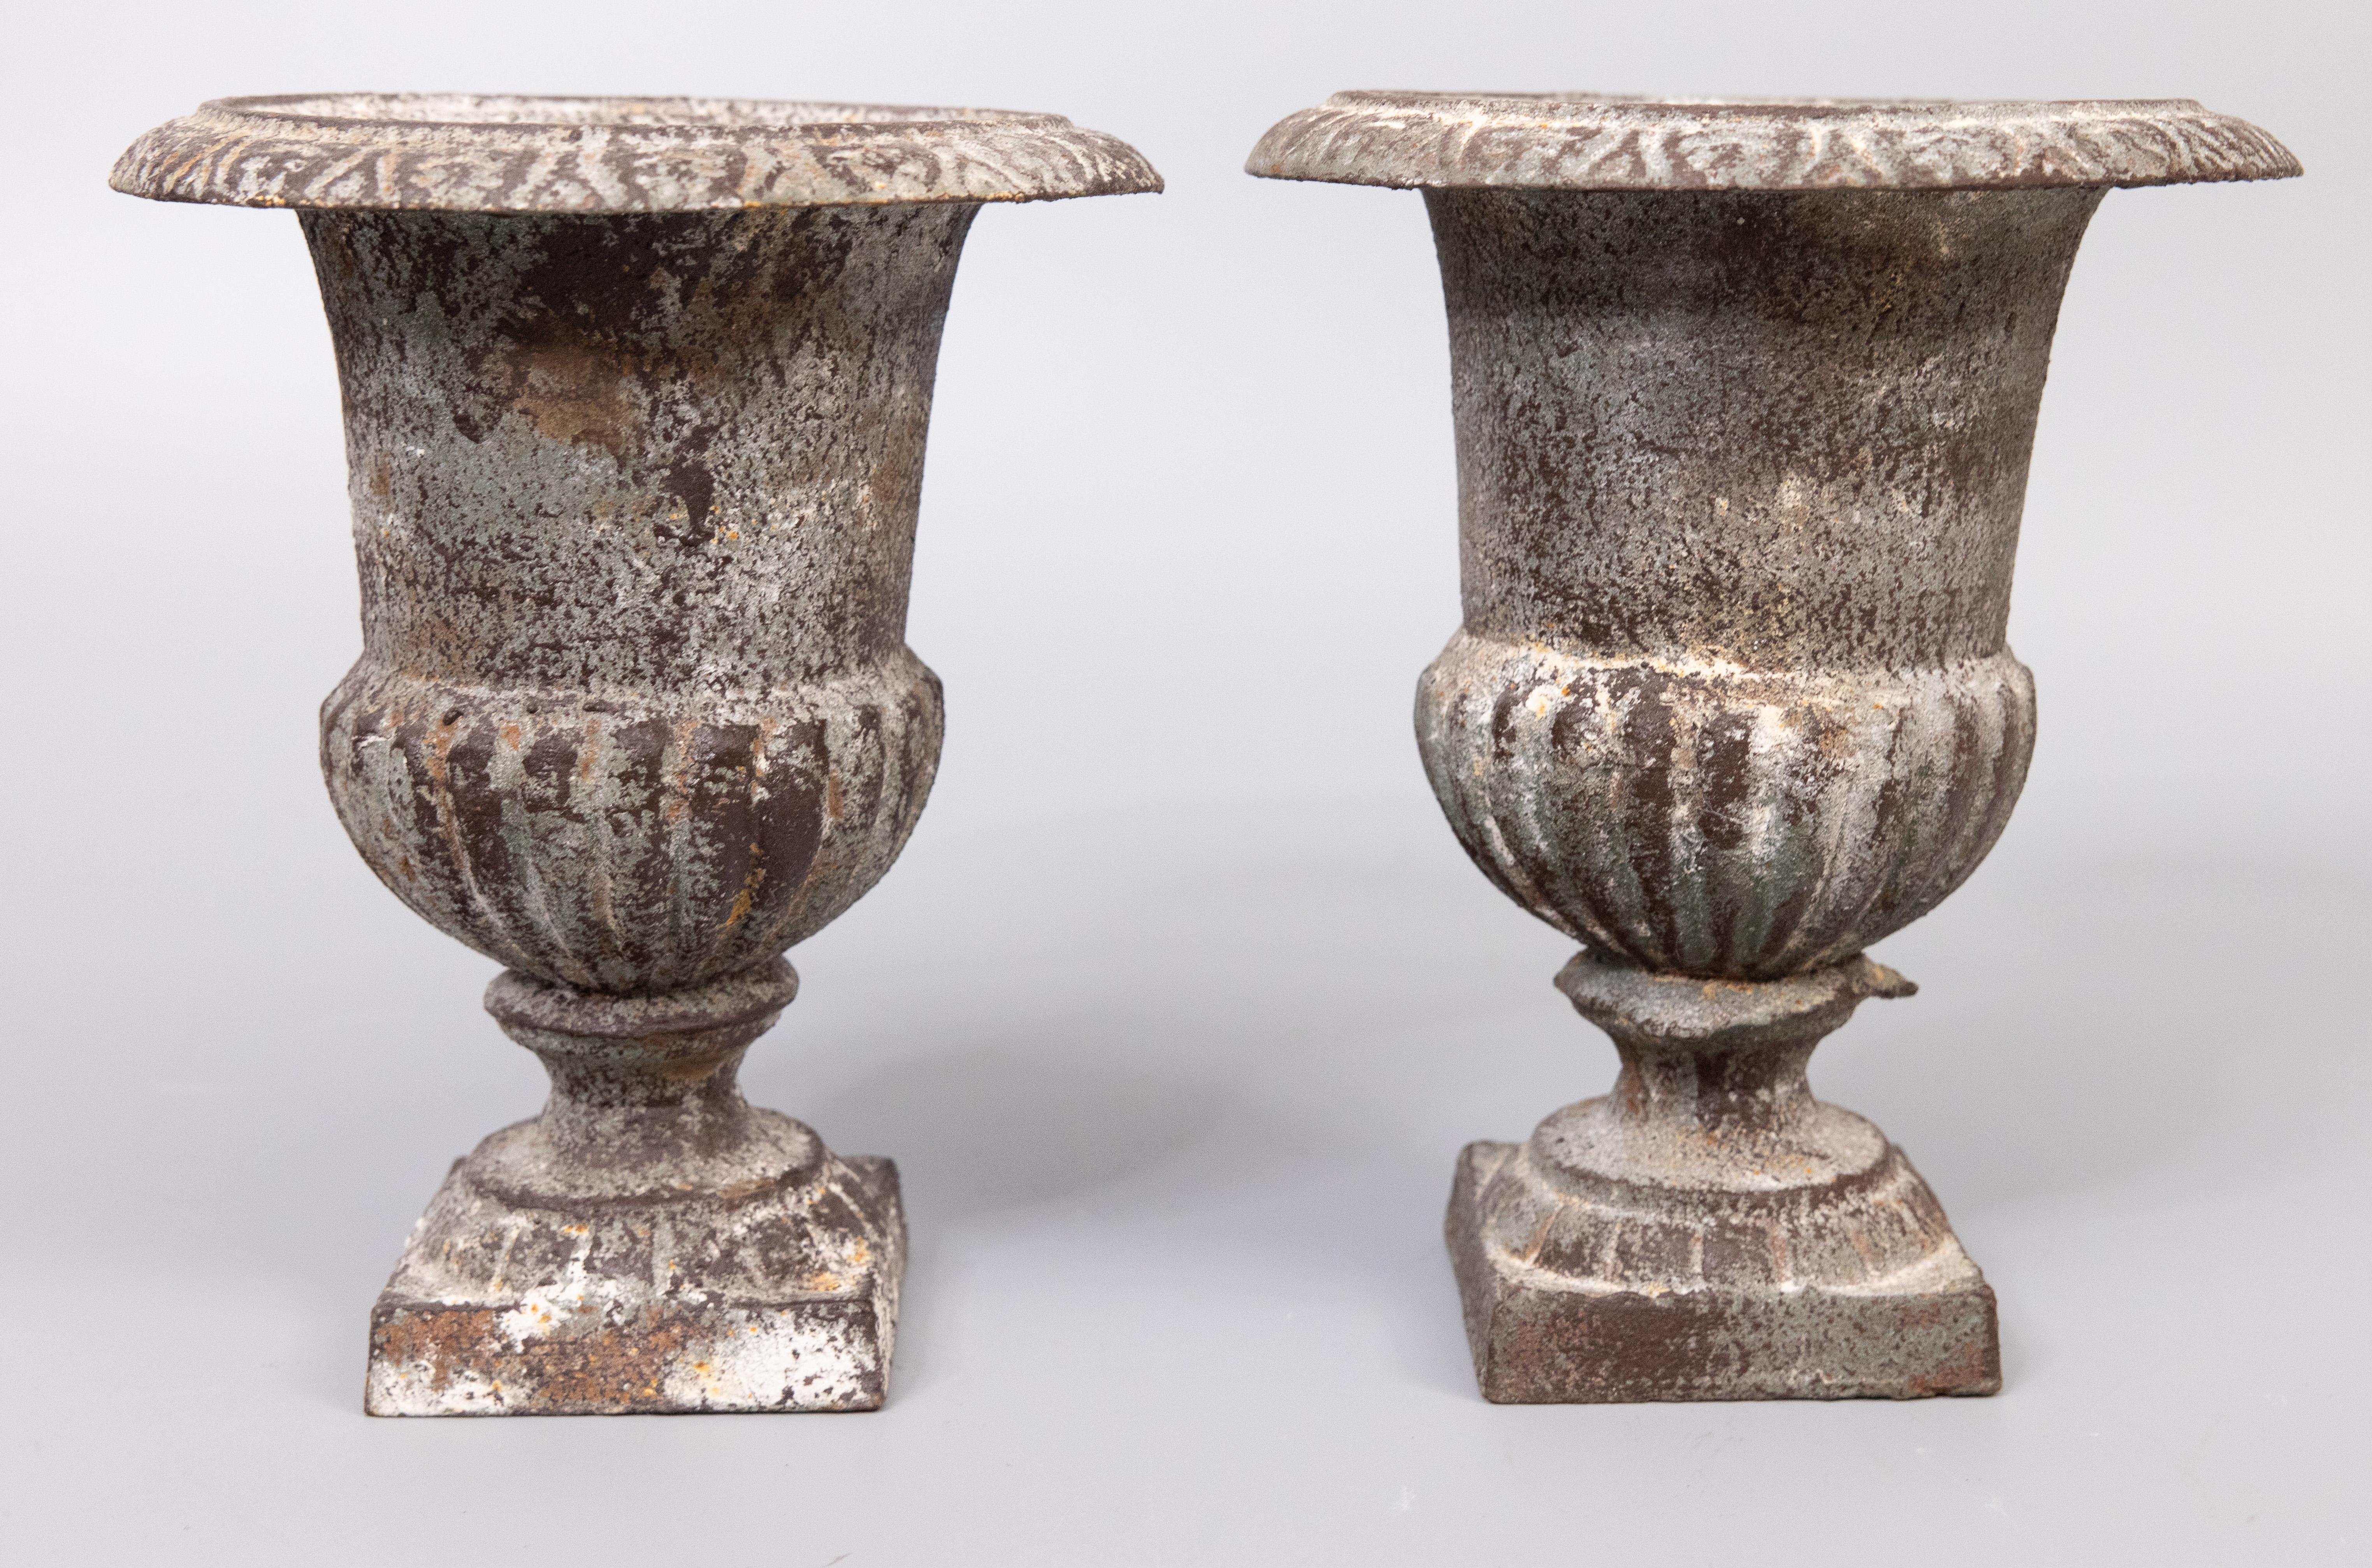 A charming petite pair of antique early 20th-Century French neoclassical style cast iron garden urns or planters with the original surface and patina. These beautiful jardinieres are heavy and well made with a classic French design in a lovely